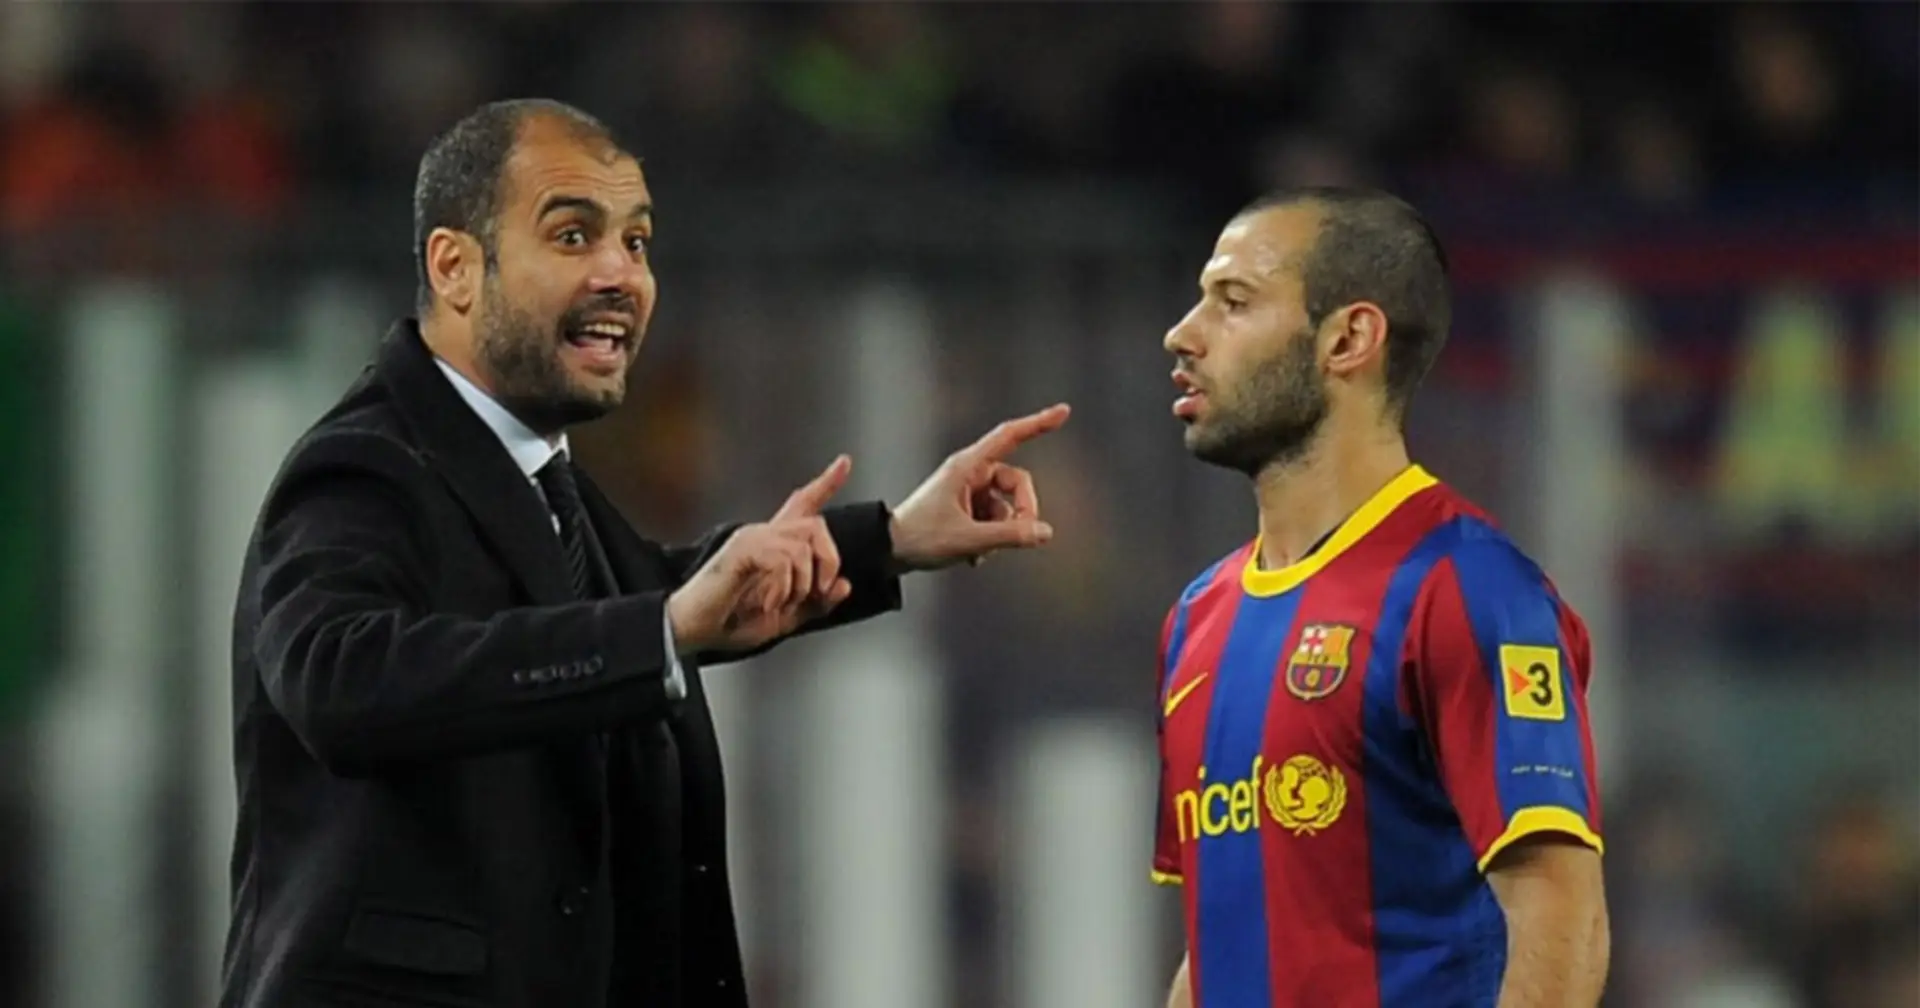 Mascherano explains in detail his shift from defensive midfielder to centre-back under Guardiola